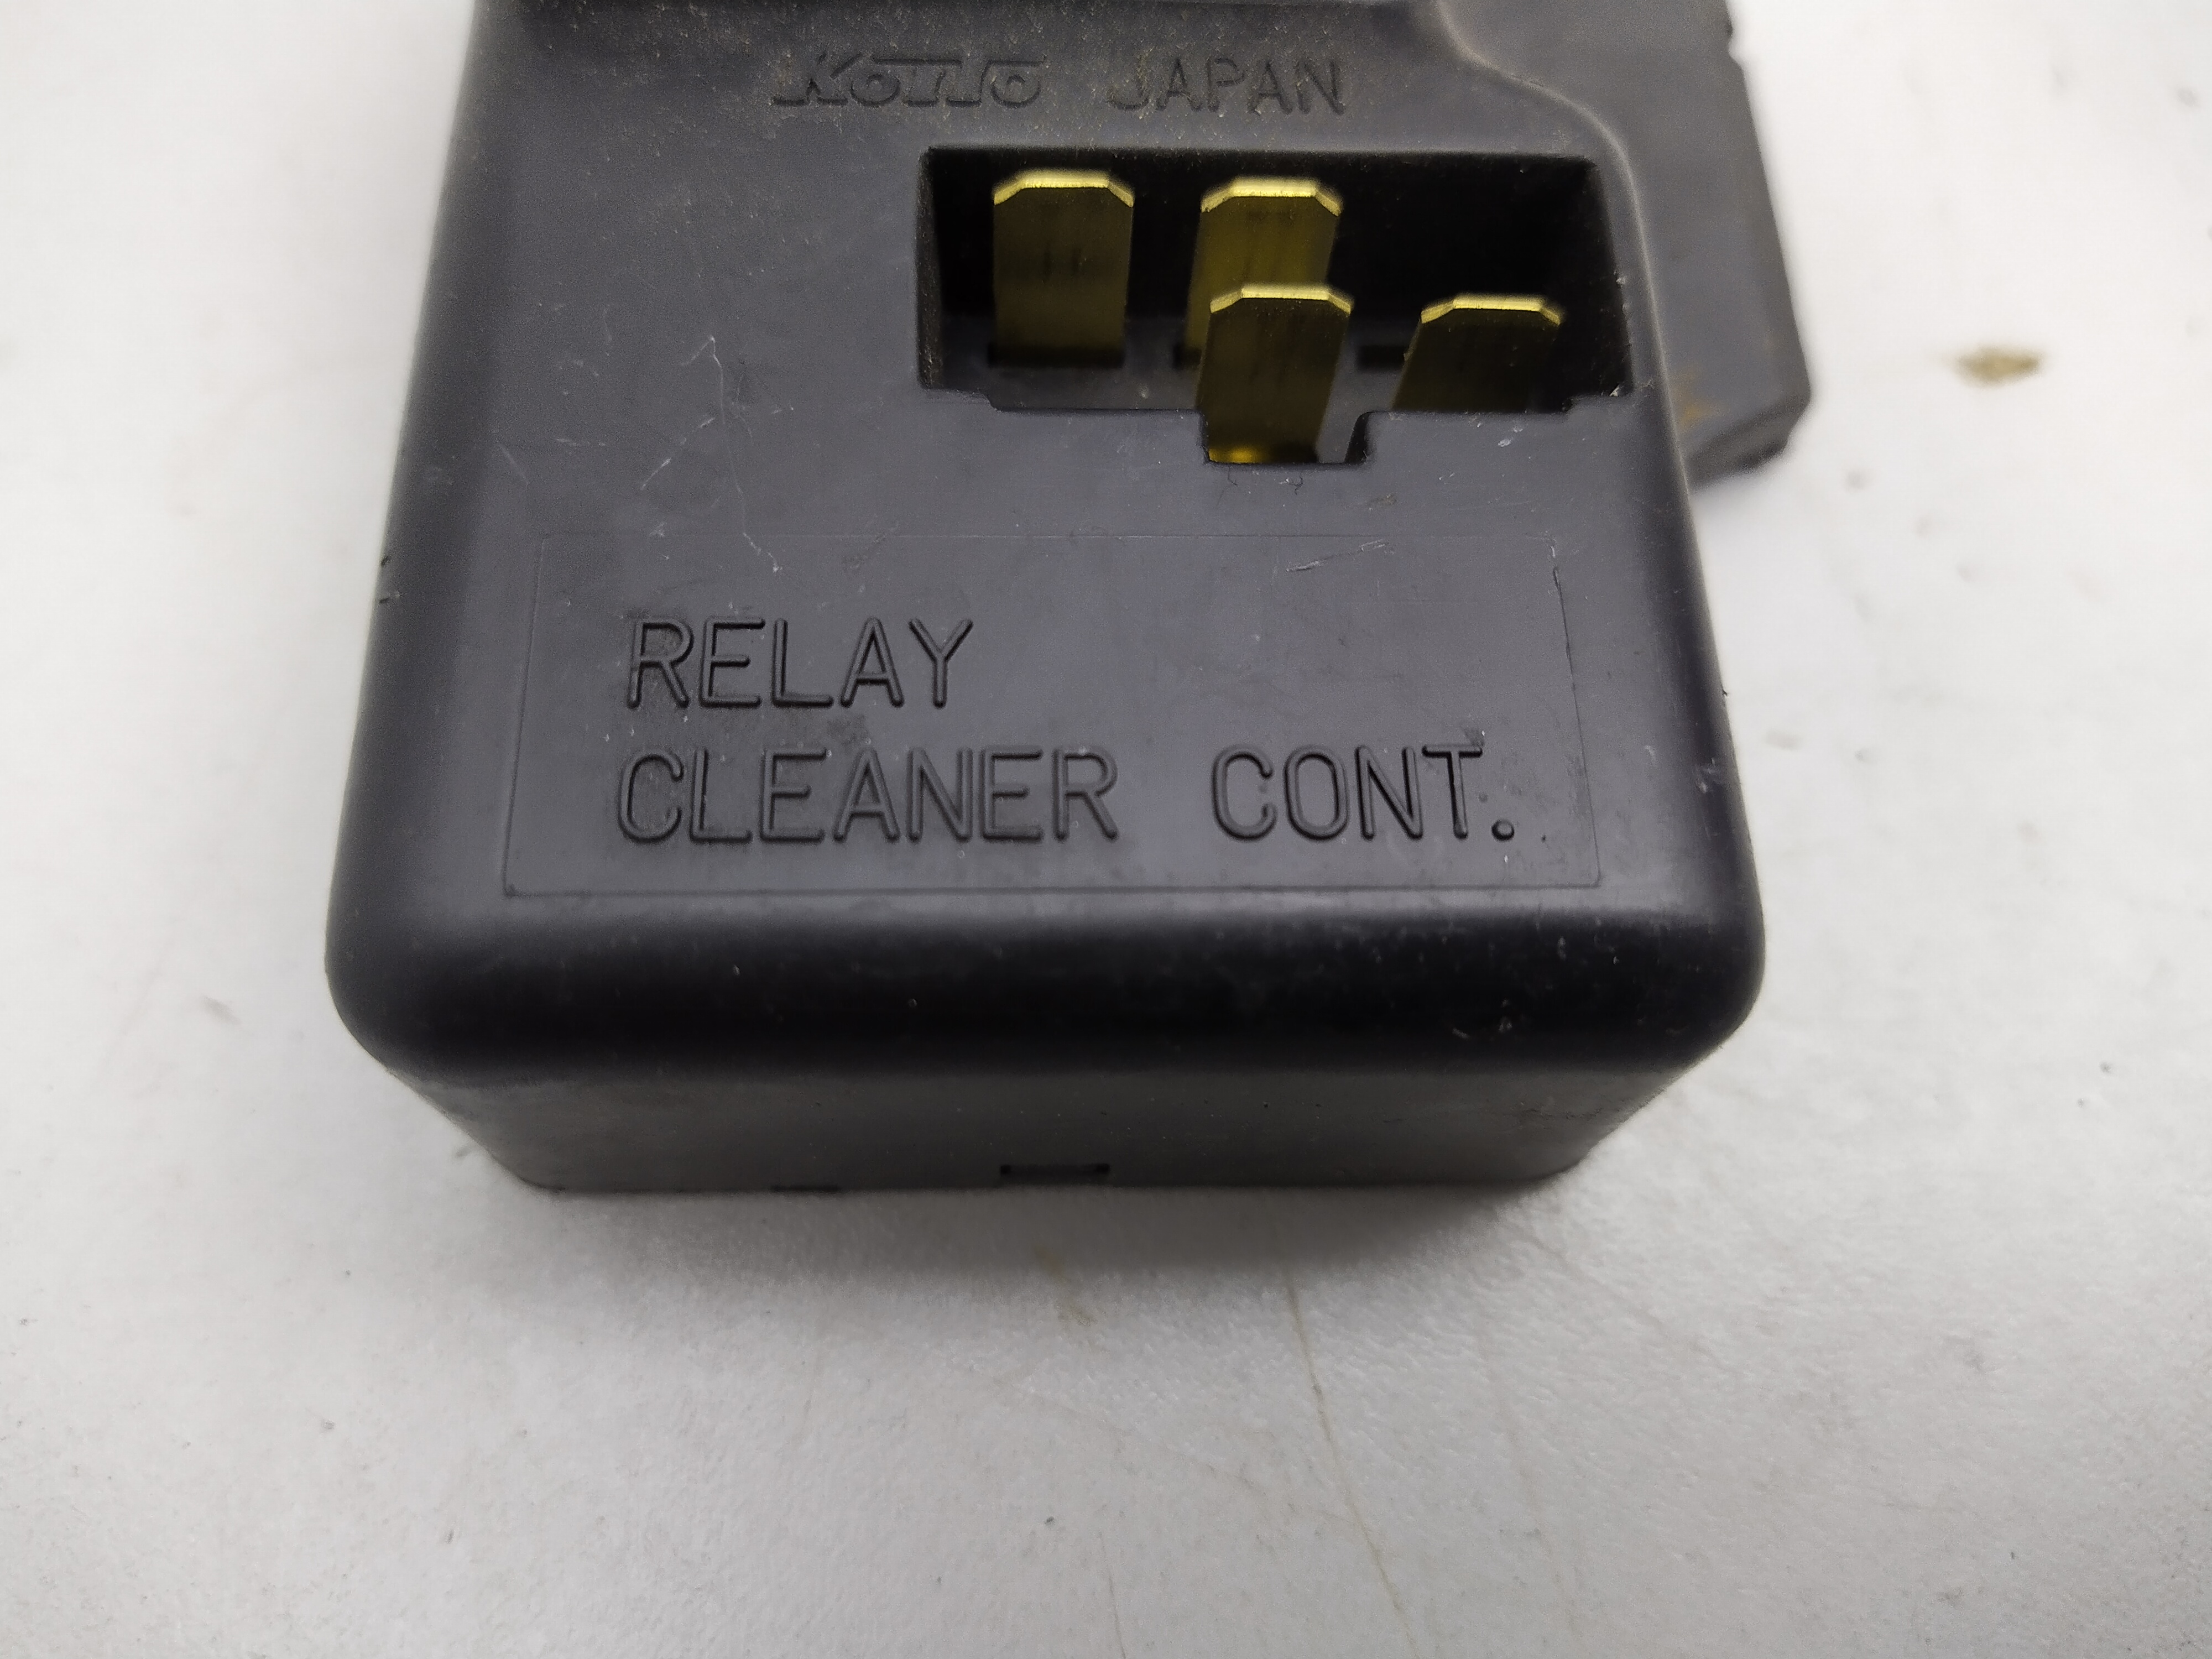 Subaru RELAY CLEANER COUT.